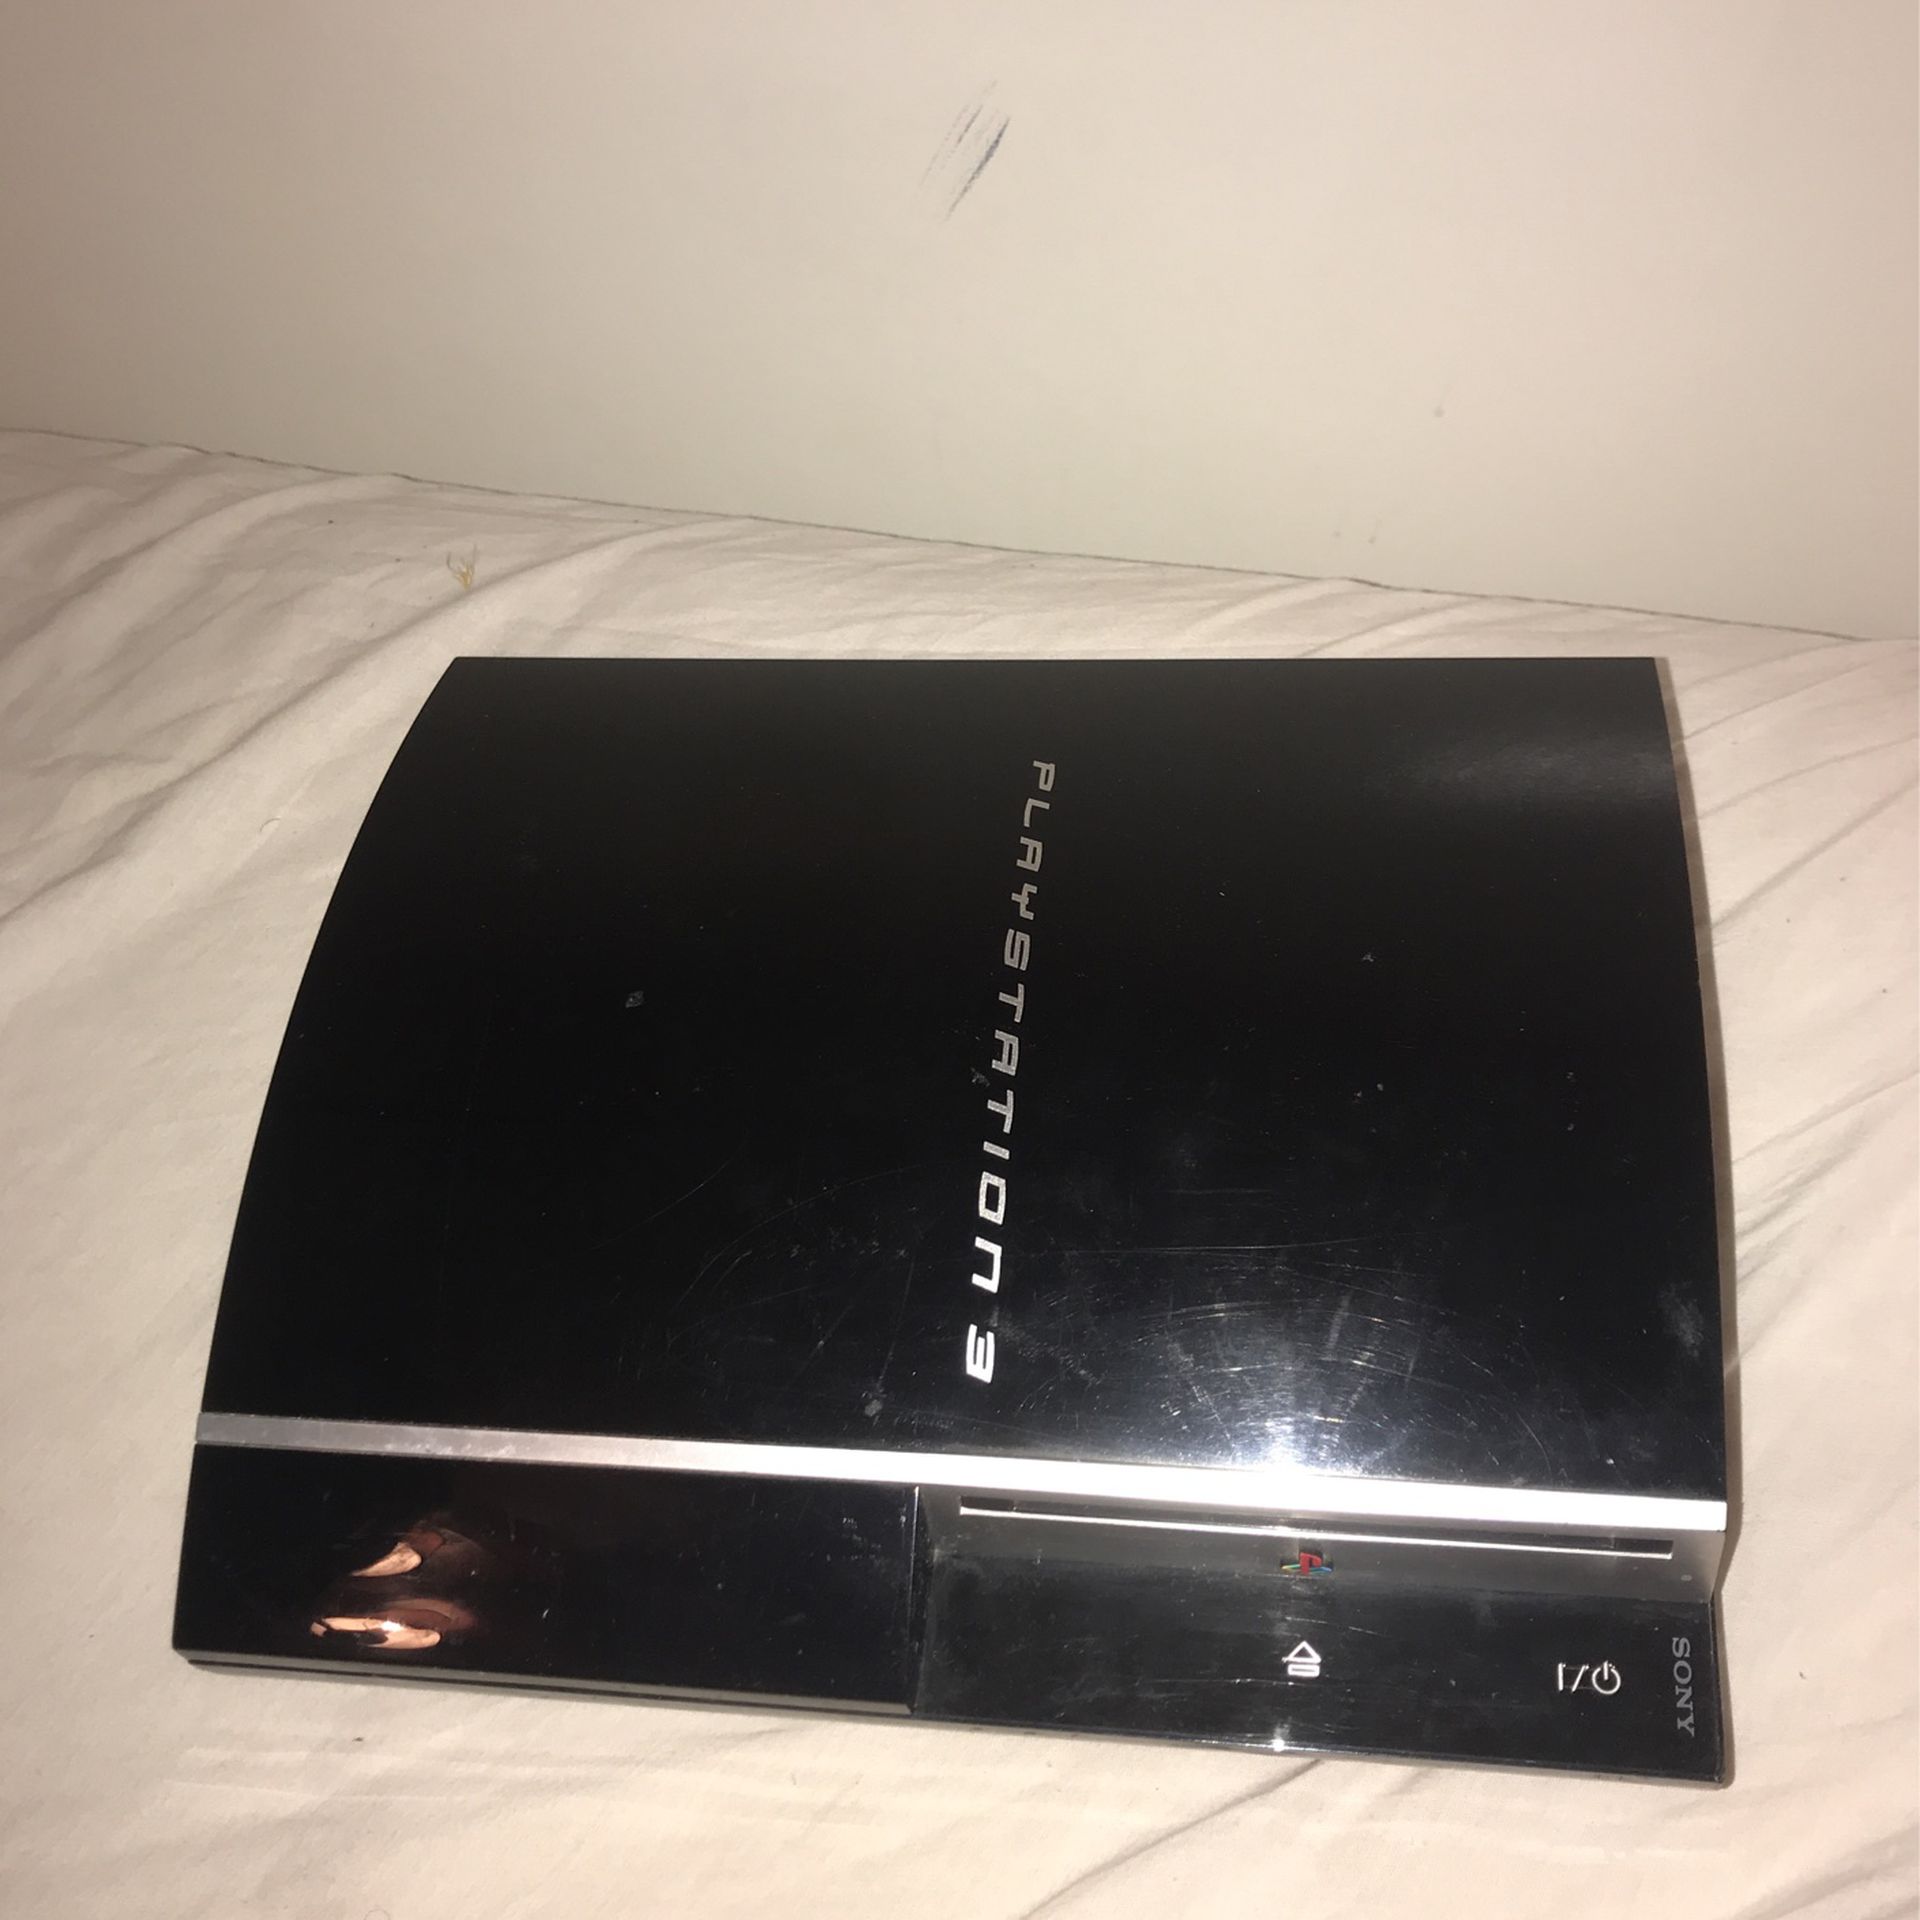 Fat Ps3 System